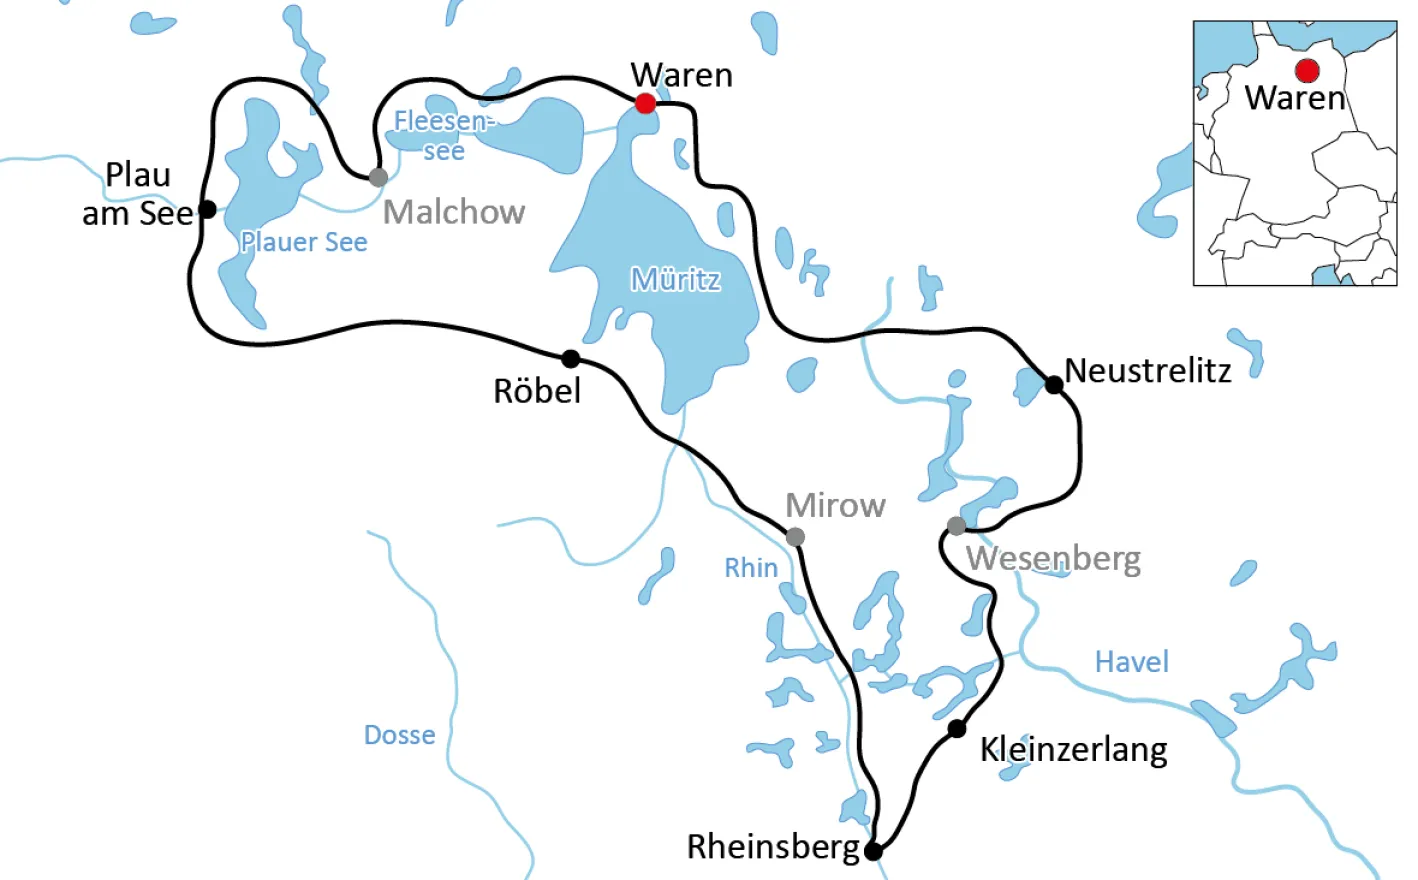 Map for the Cycle tour around the Mecklenburg Lake District